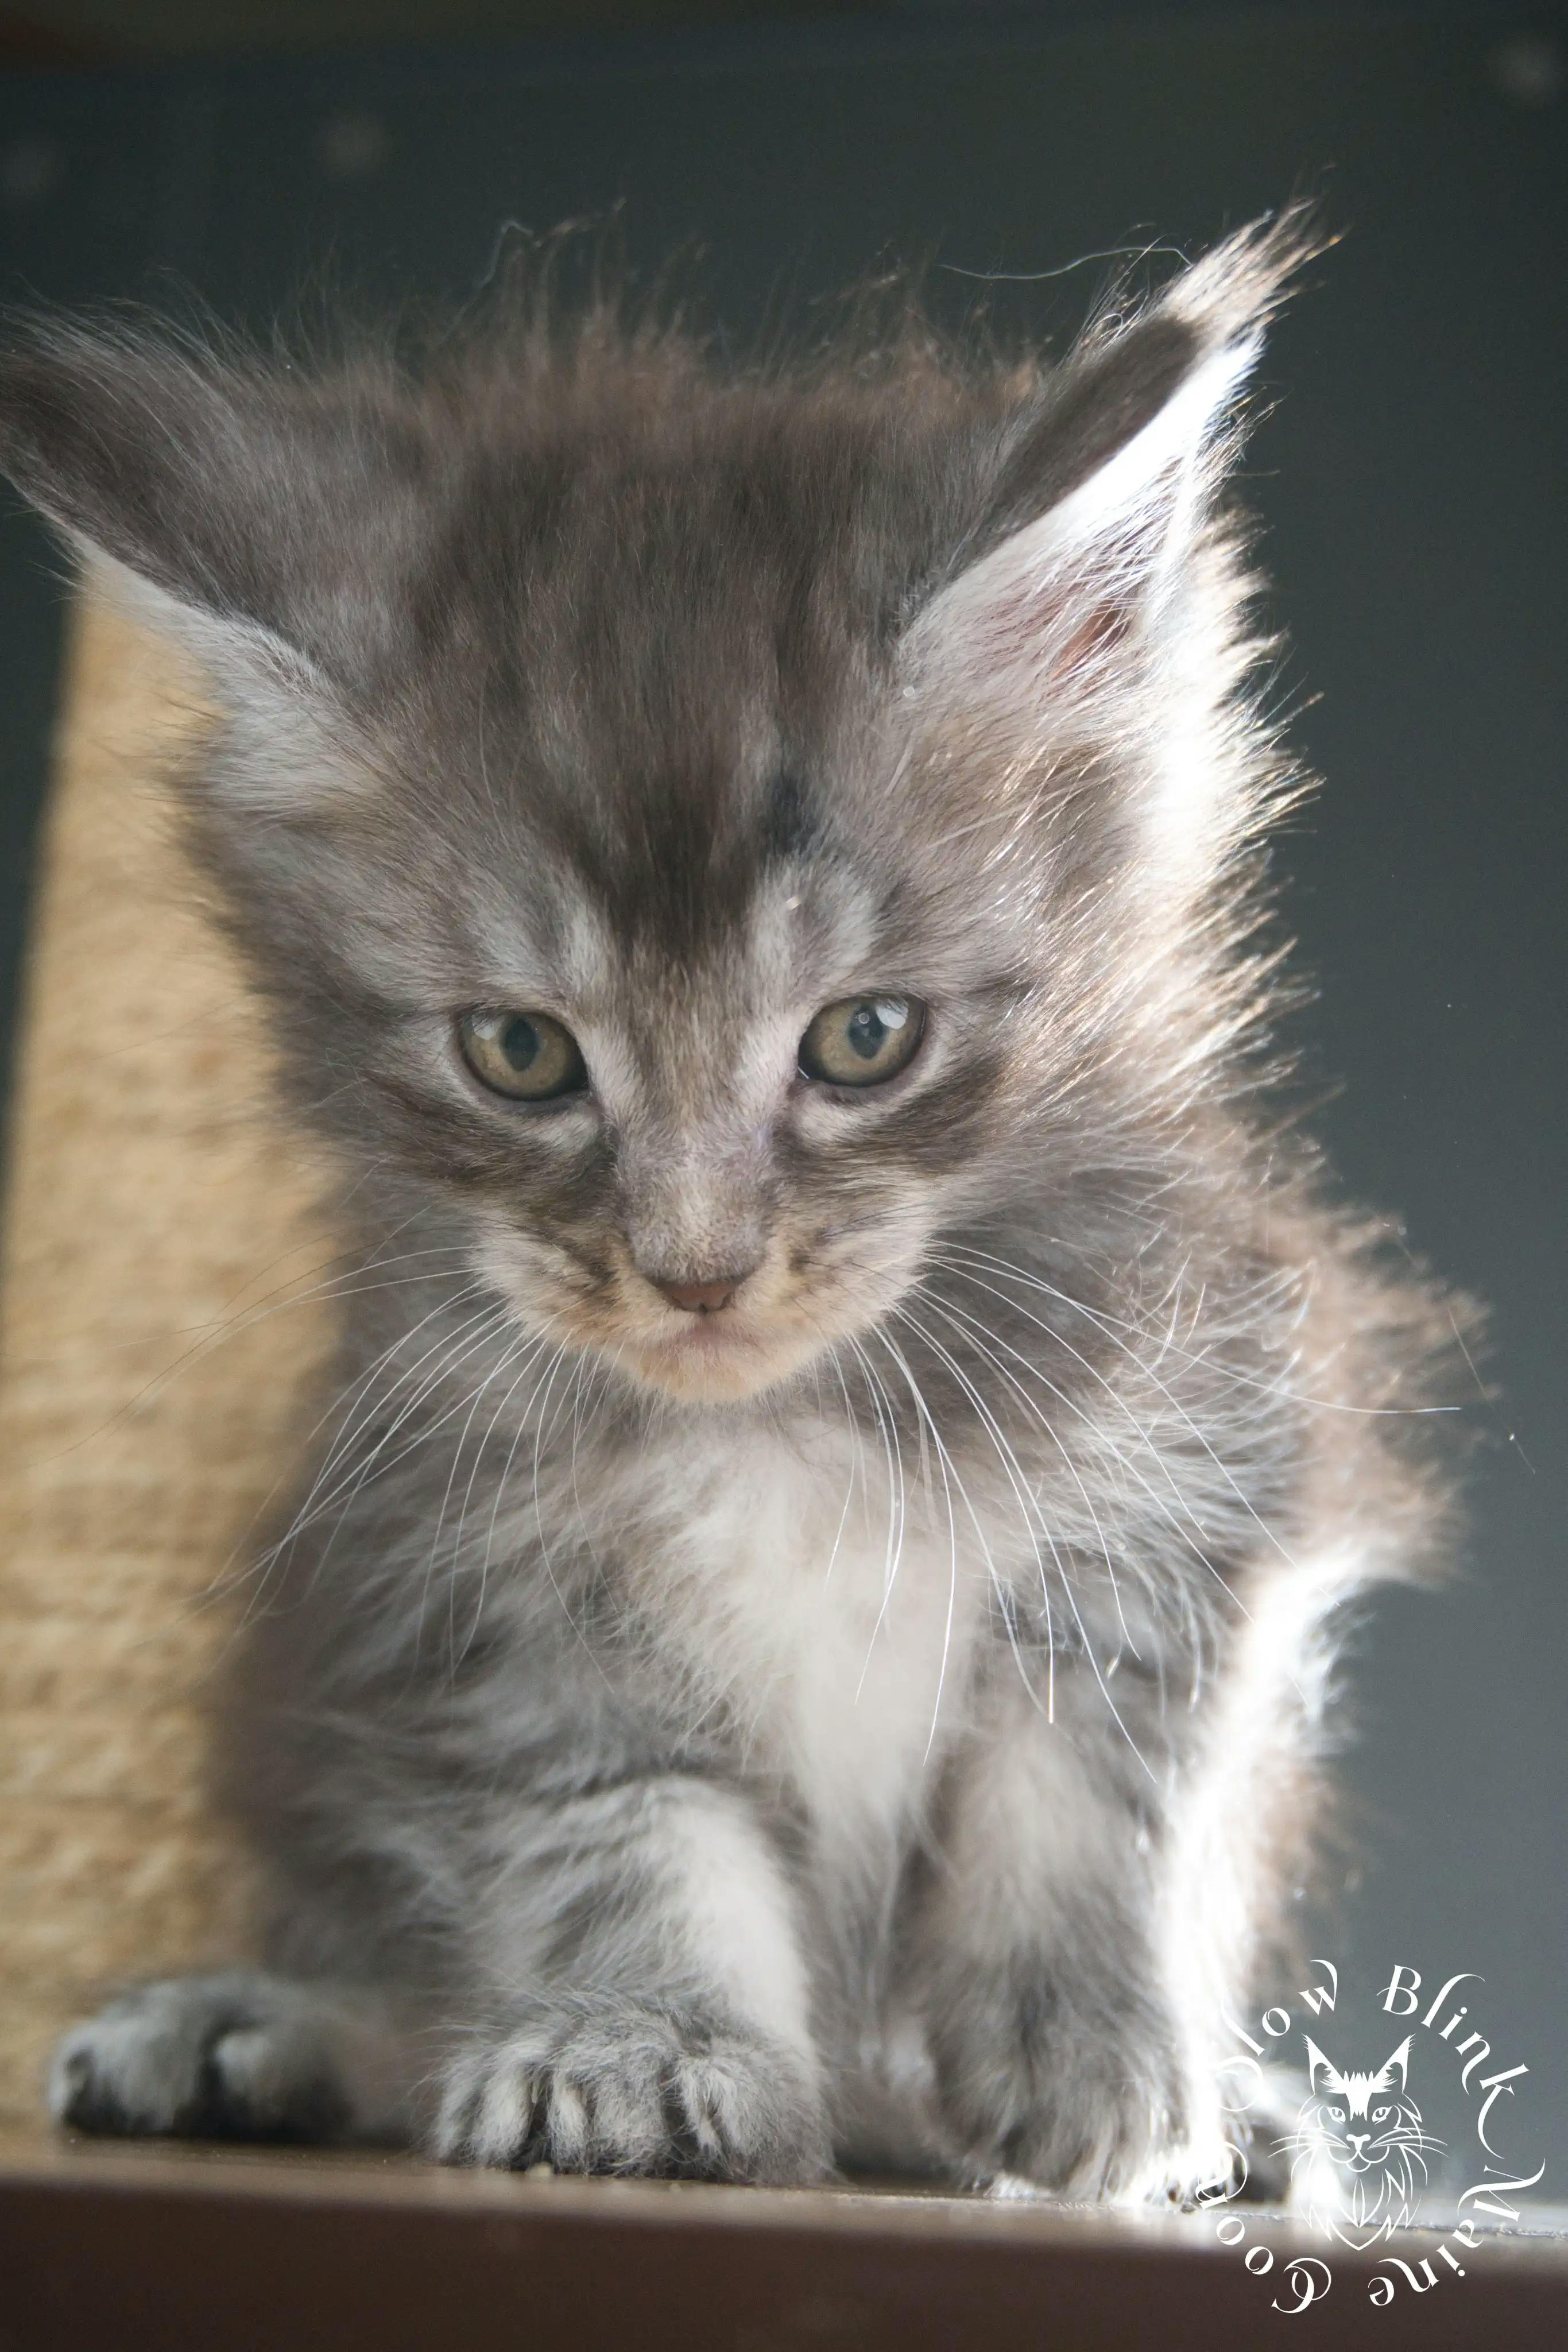 Blue Silver Tabby Maine Coon Kittens > blue silver tabby maine coon kitten | slowblinkmainecoons | 309